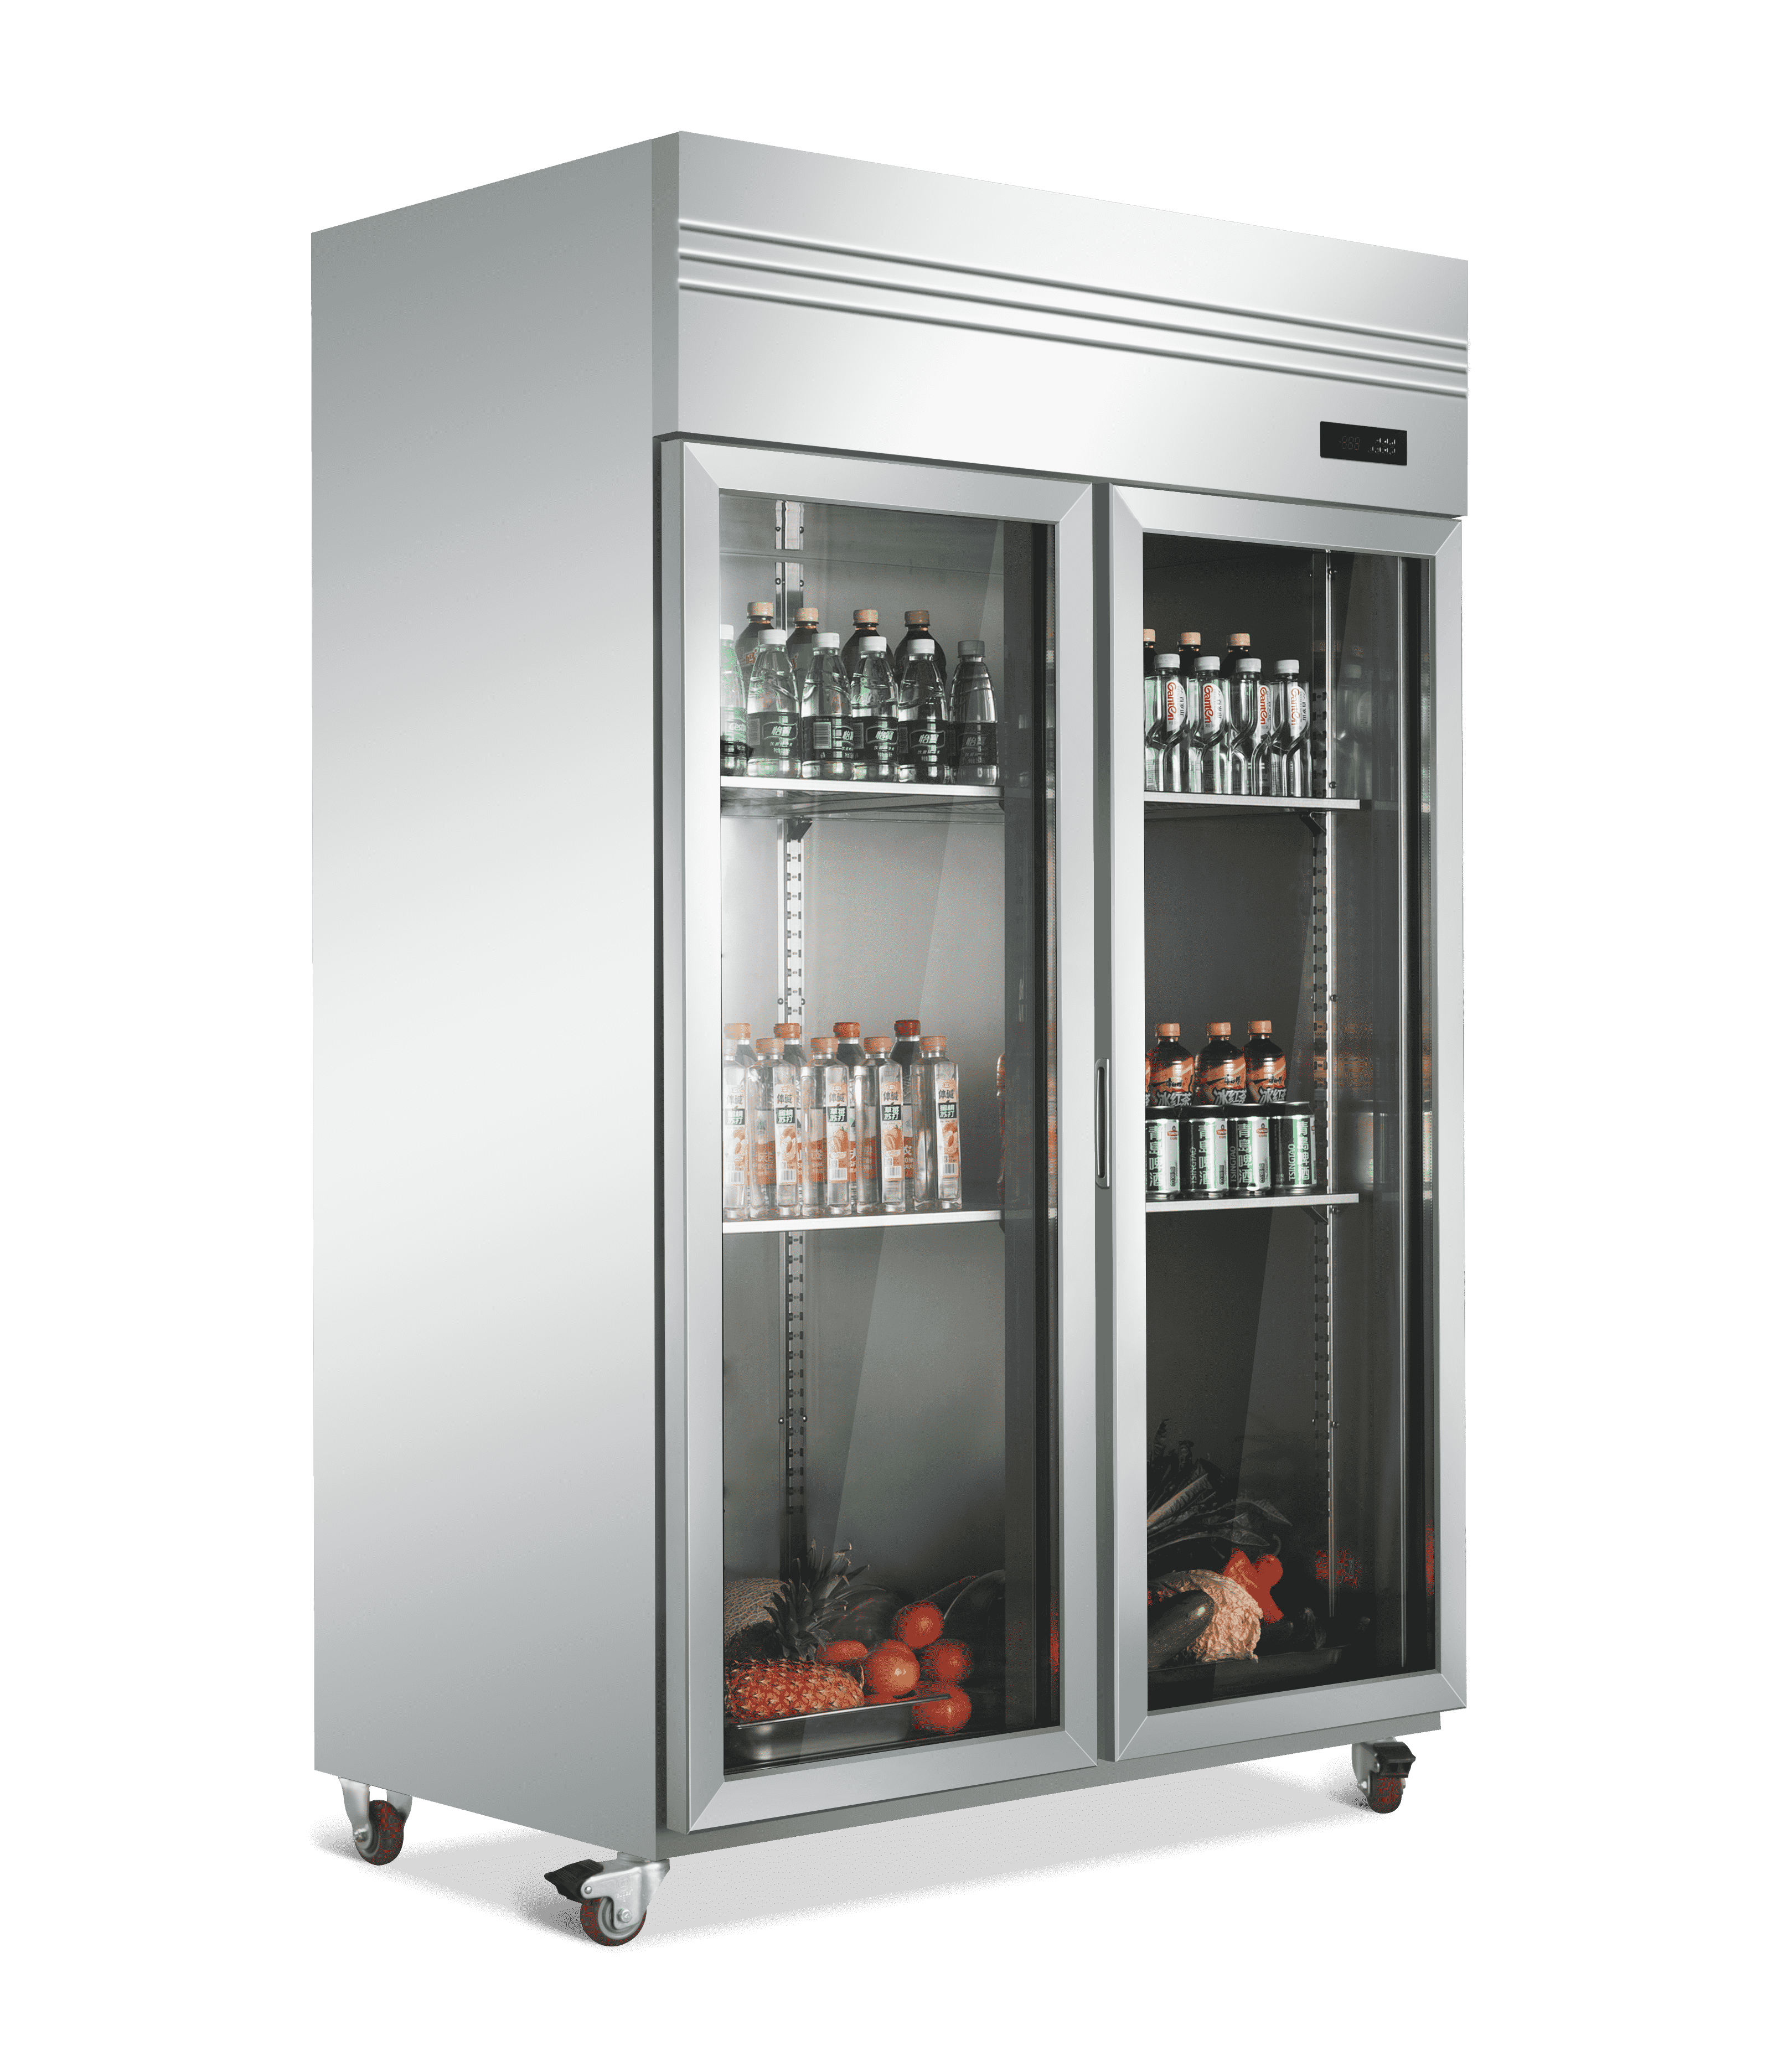 Upright/Reach-in Commercial Refrigerator/Freezers_KK12 Series